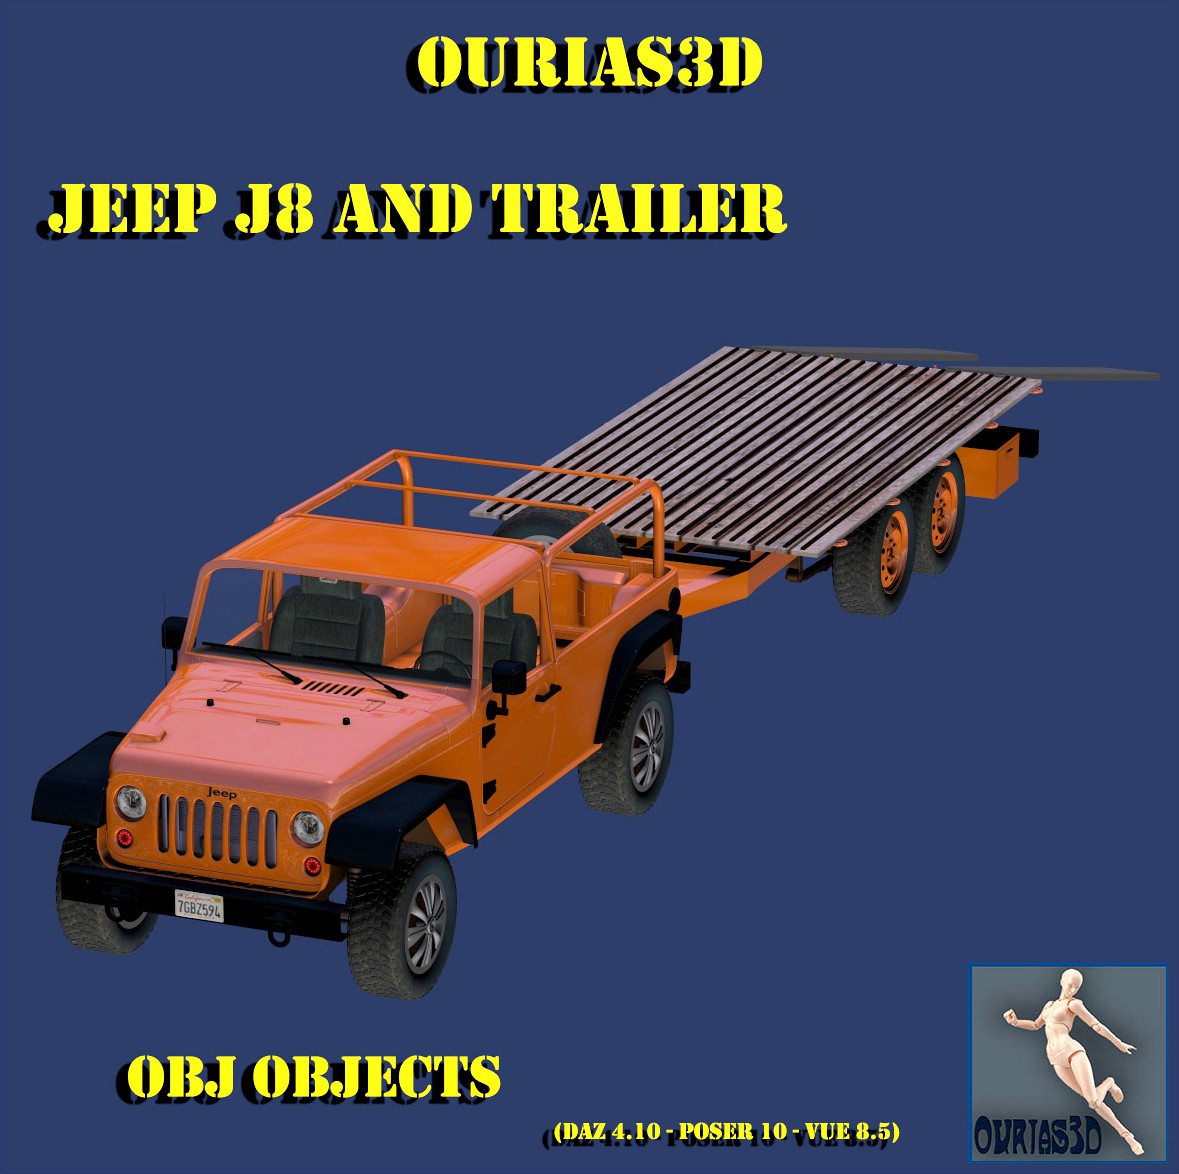 Jeep J8 and Trailer - Extended License